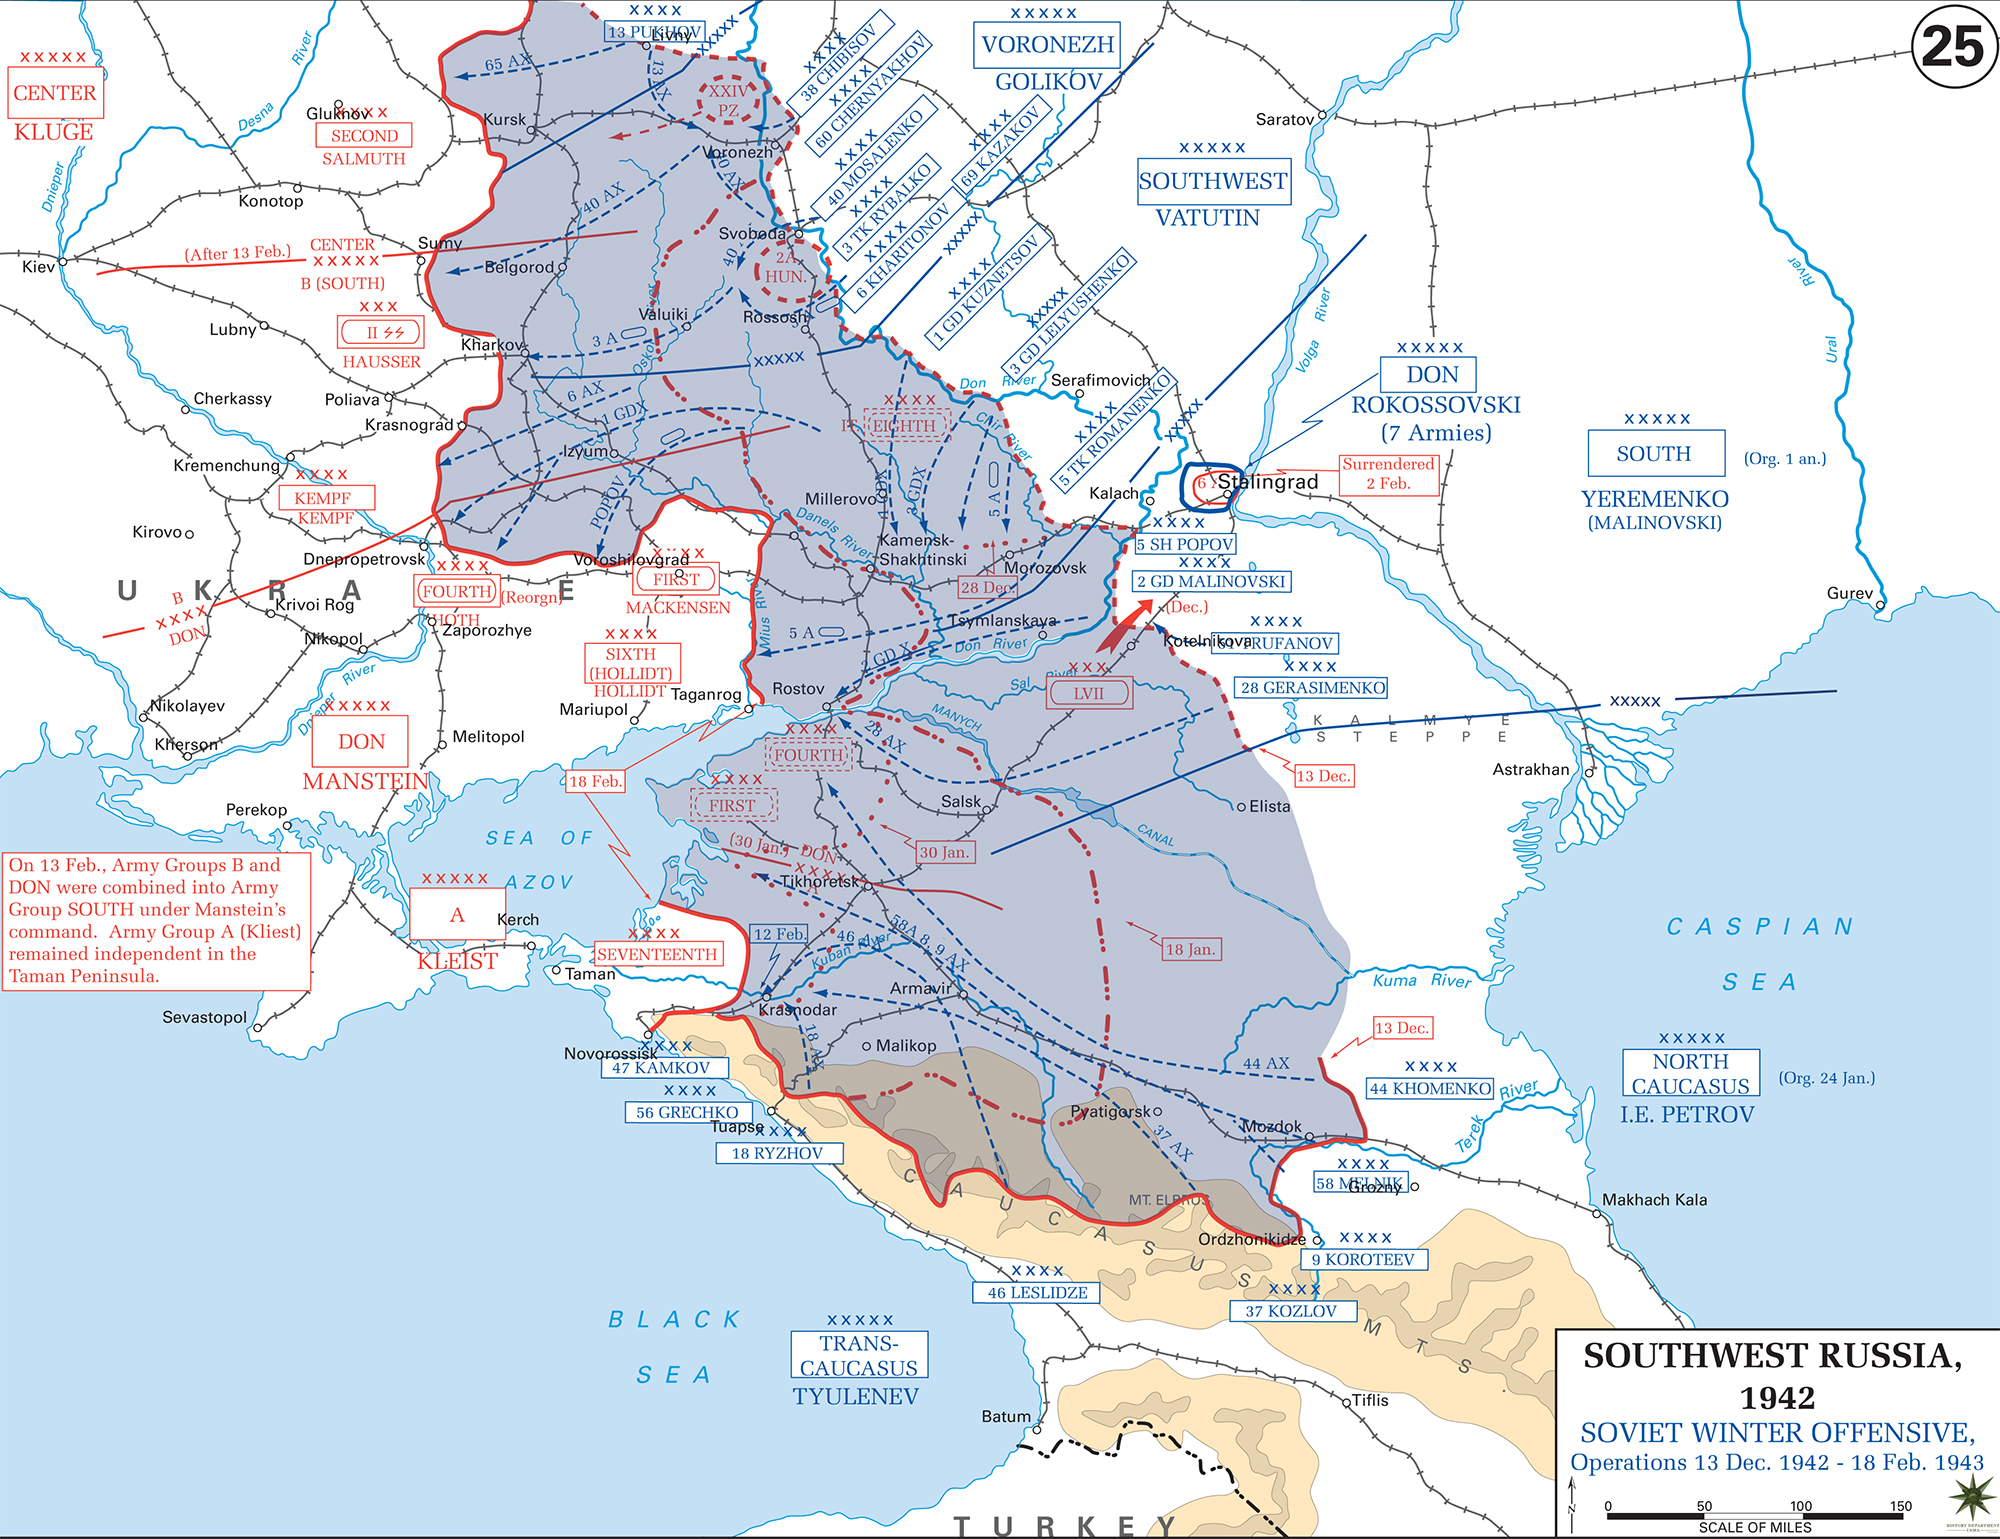 Map of WWII: Southwest Russia 1942/1943, Soviet Winter Offensive, Operations December 13, 1942 - February 18, 1943